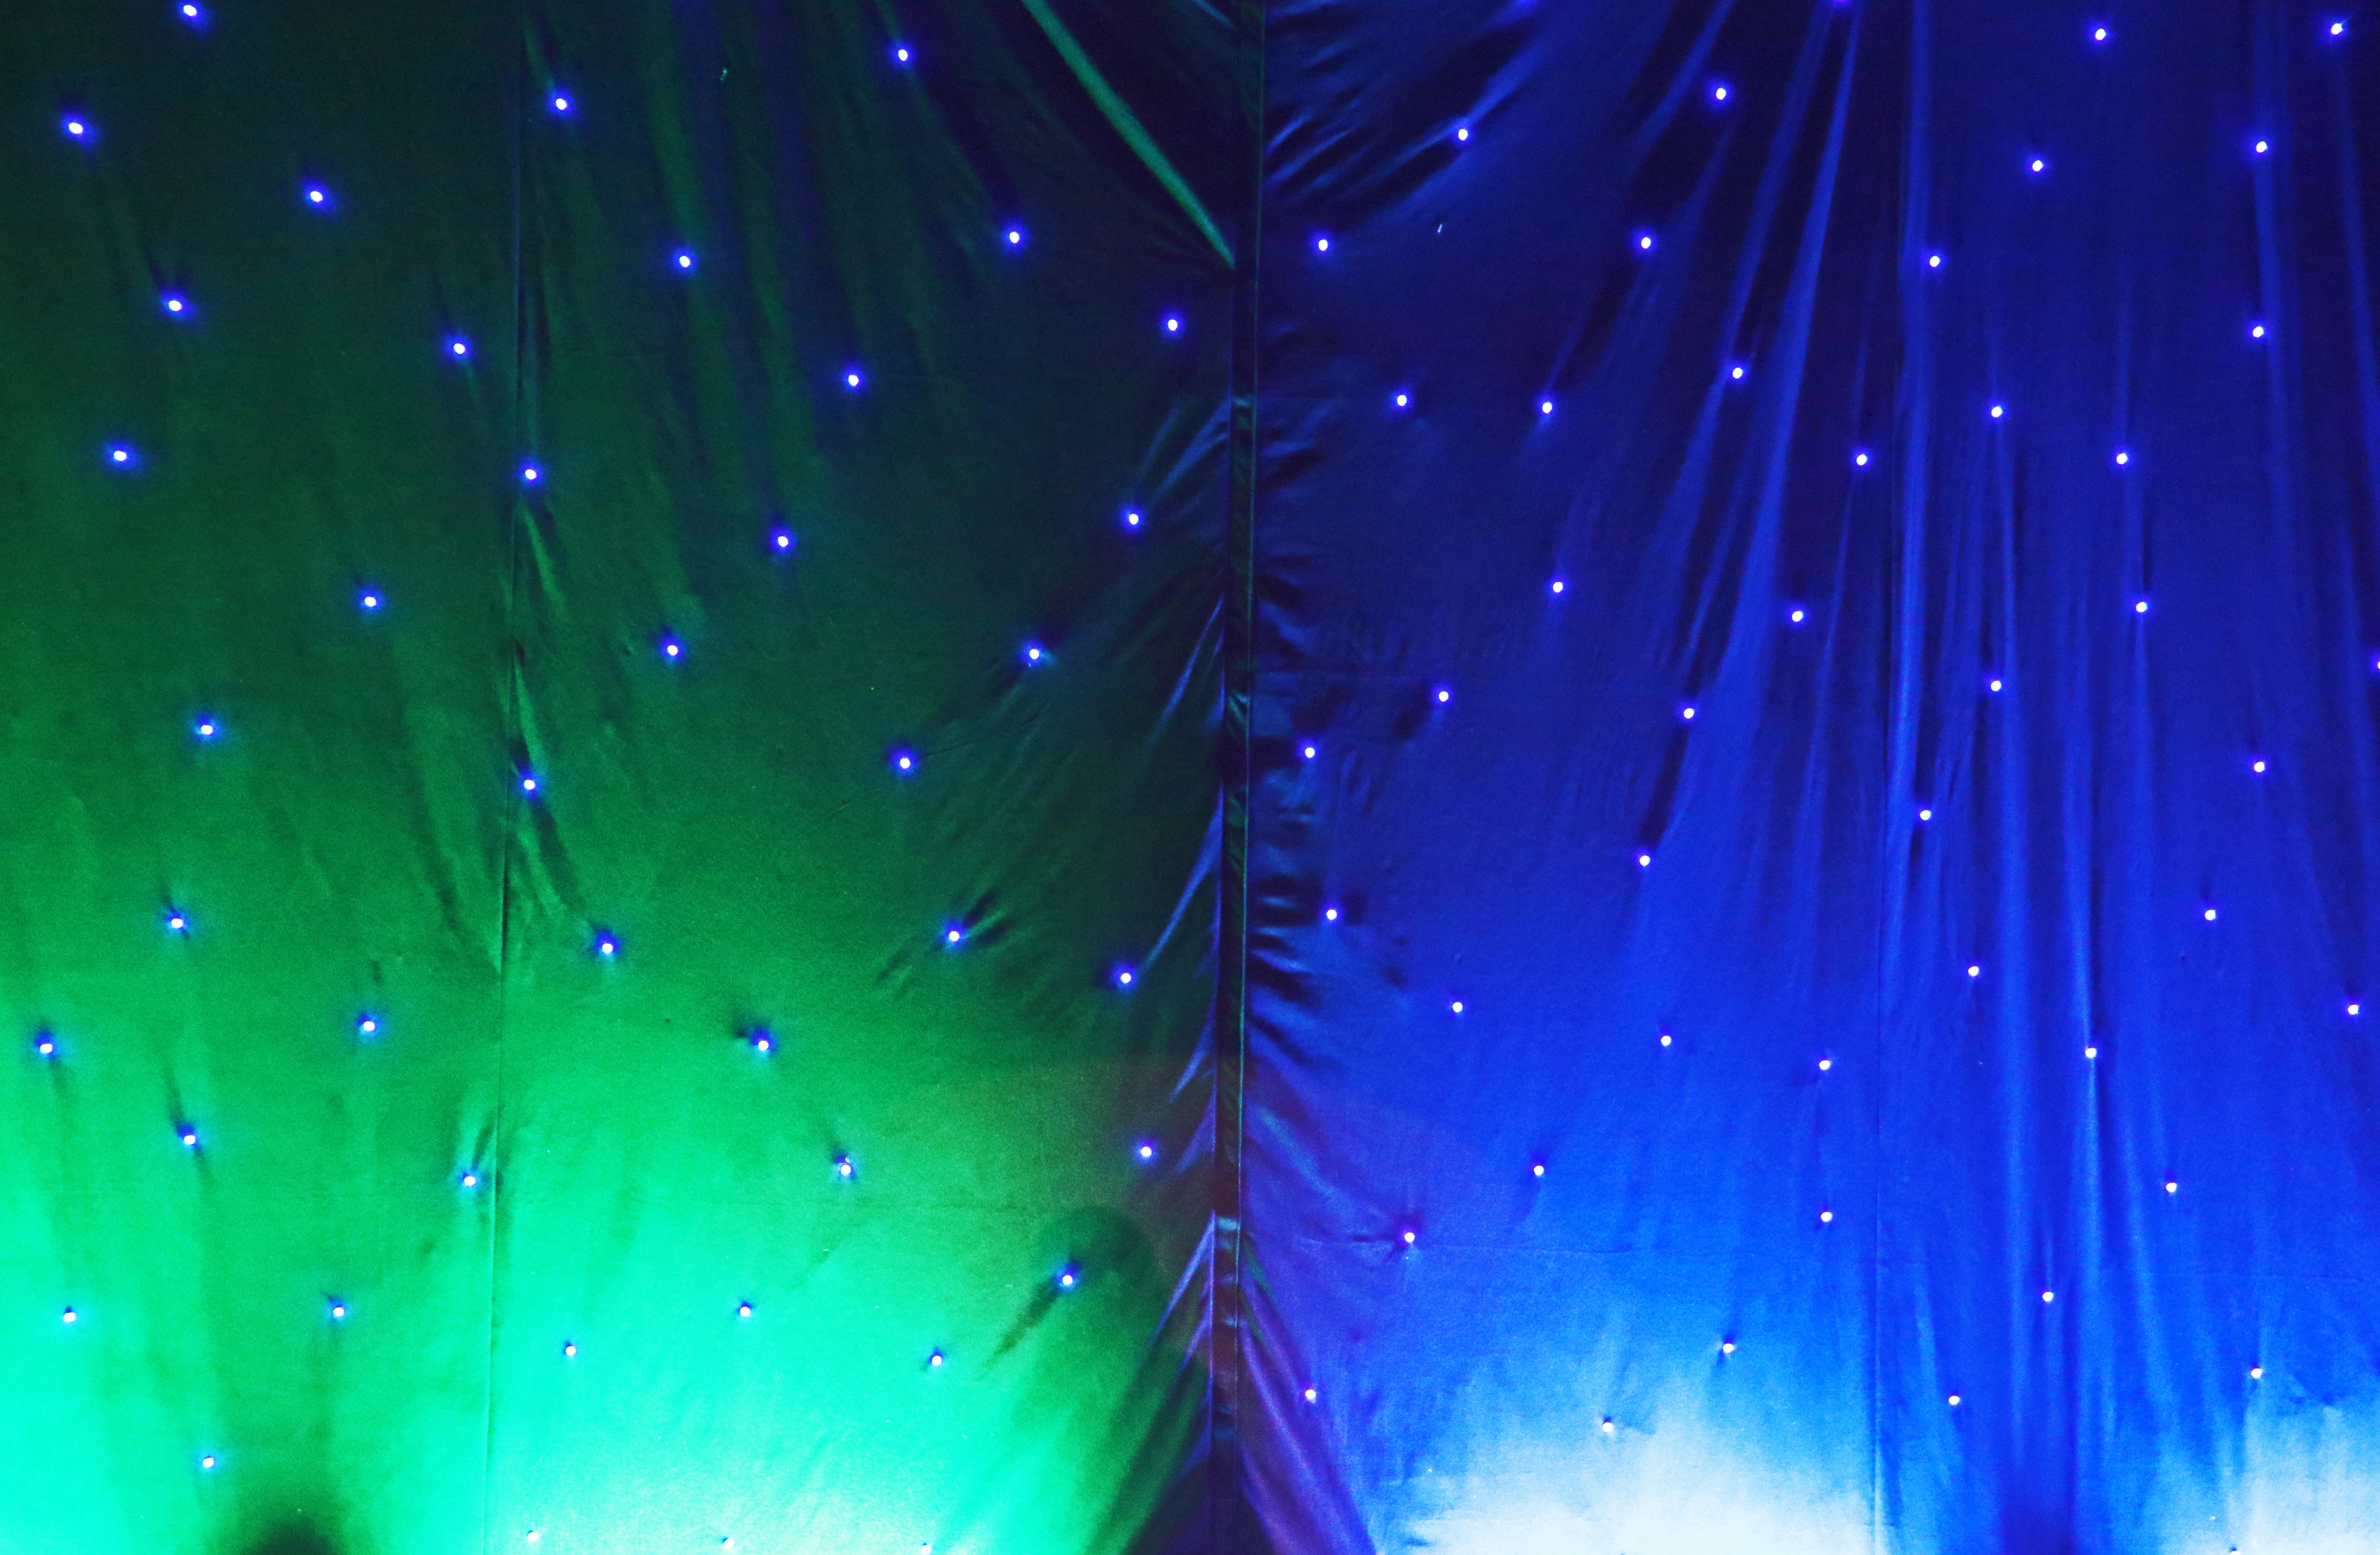 Green and blue decoration with lights, Green and blue decoration with lights